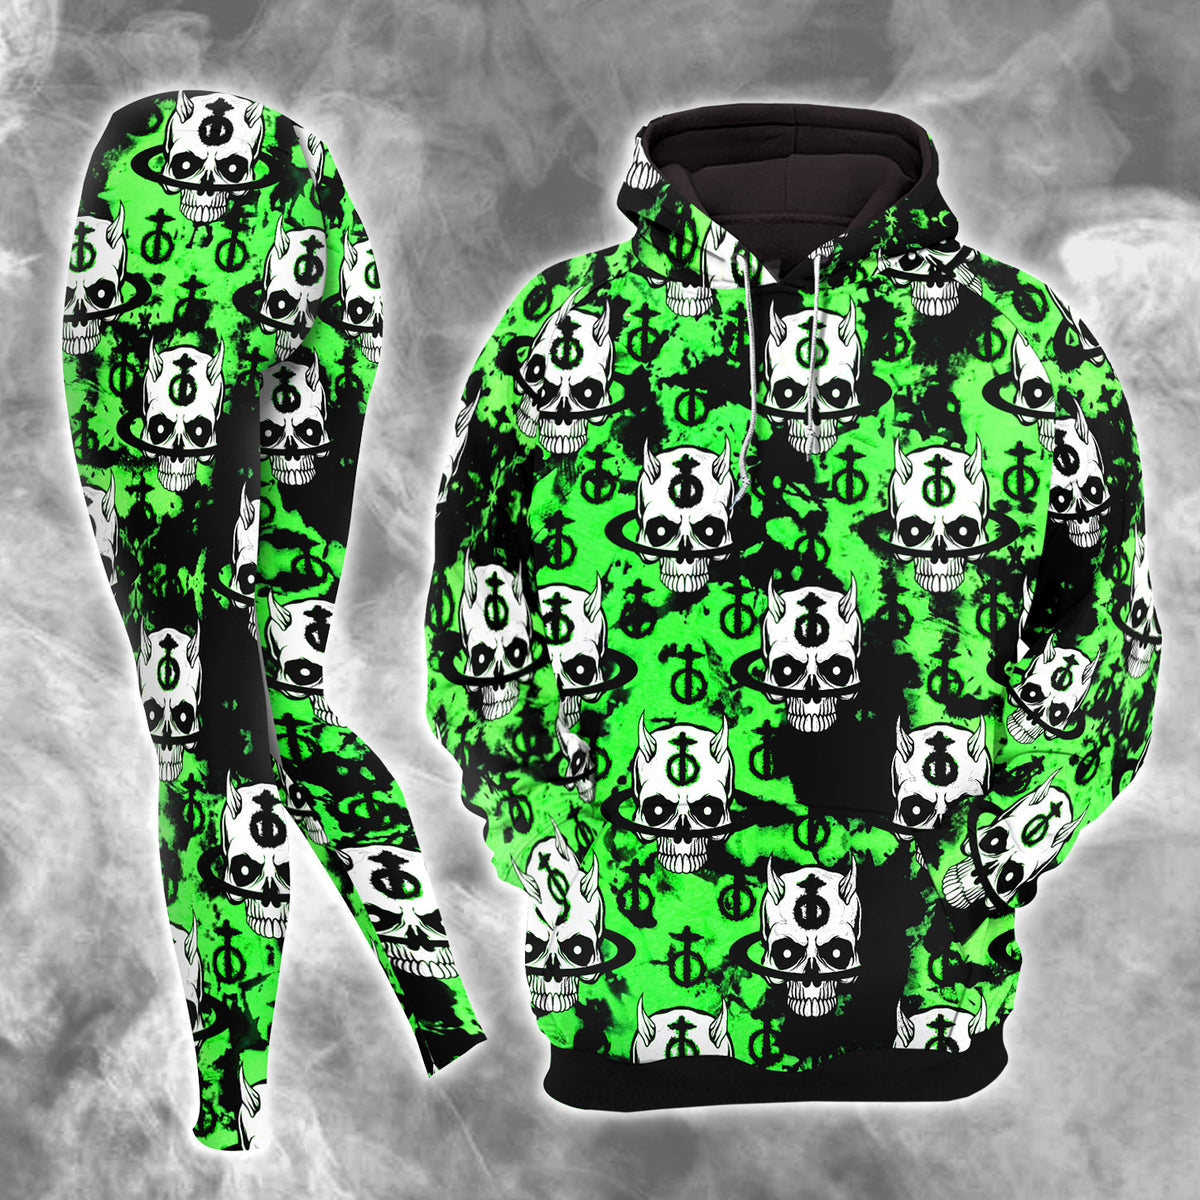 Dark Green Skull Devil Combo Hoodie and Leggings - Dark and edgy matching set with skull designs for a unique and stylish look